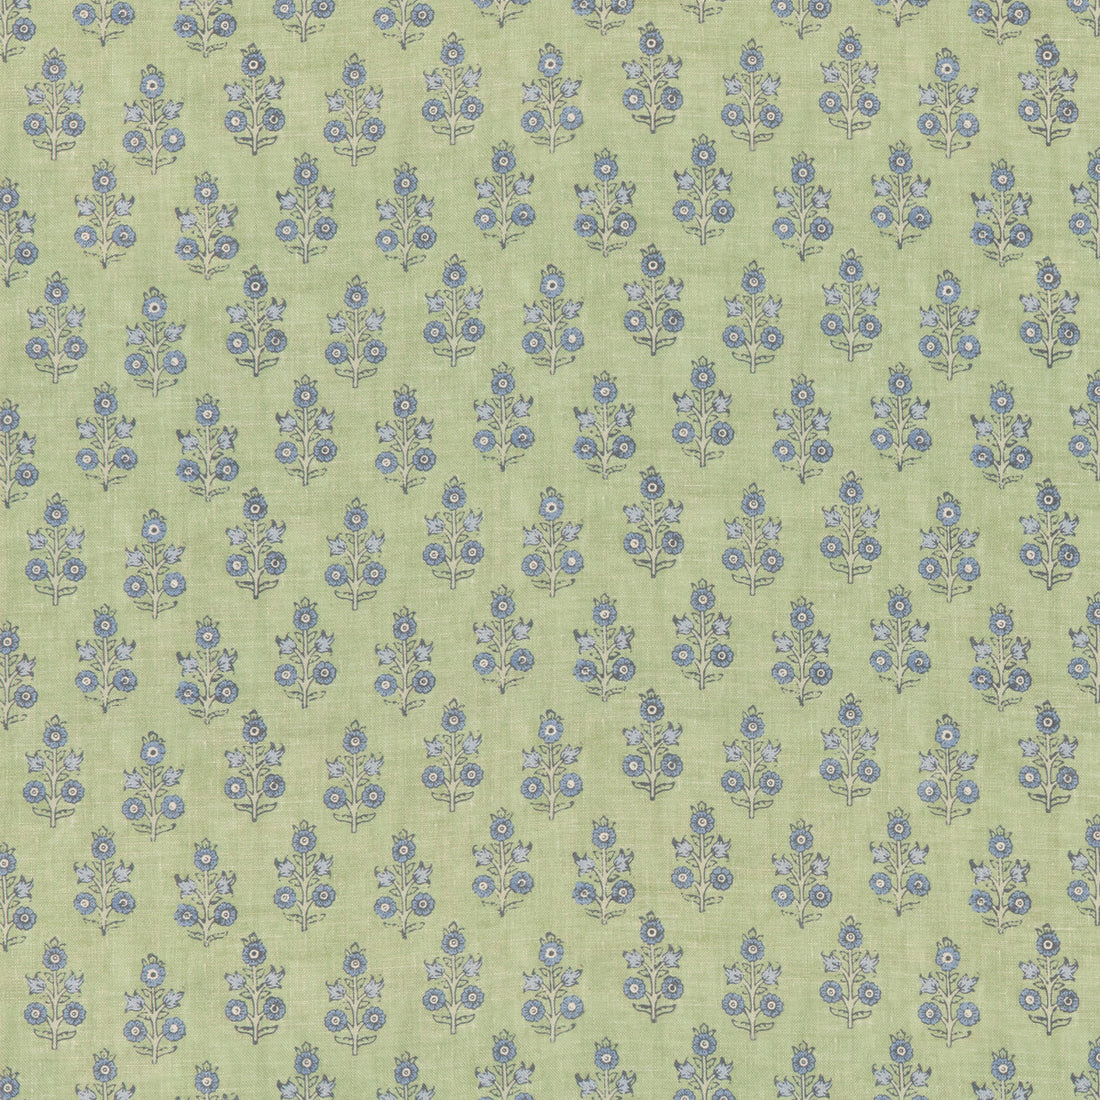 Poppy Sprig fabric in green/blue color - pattern BP11003.2.0 - by G P &amp; J Baker in the House Small Prints collection